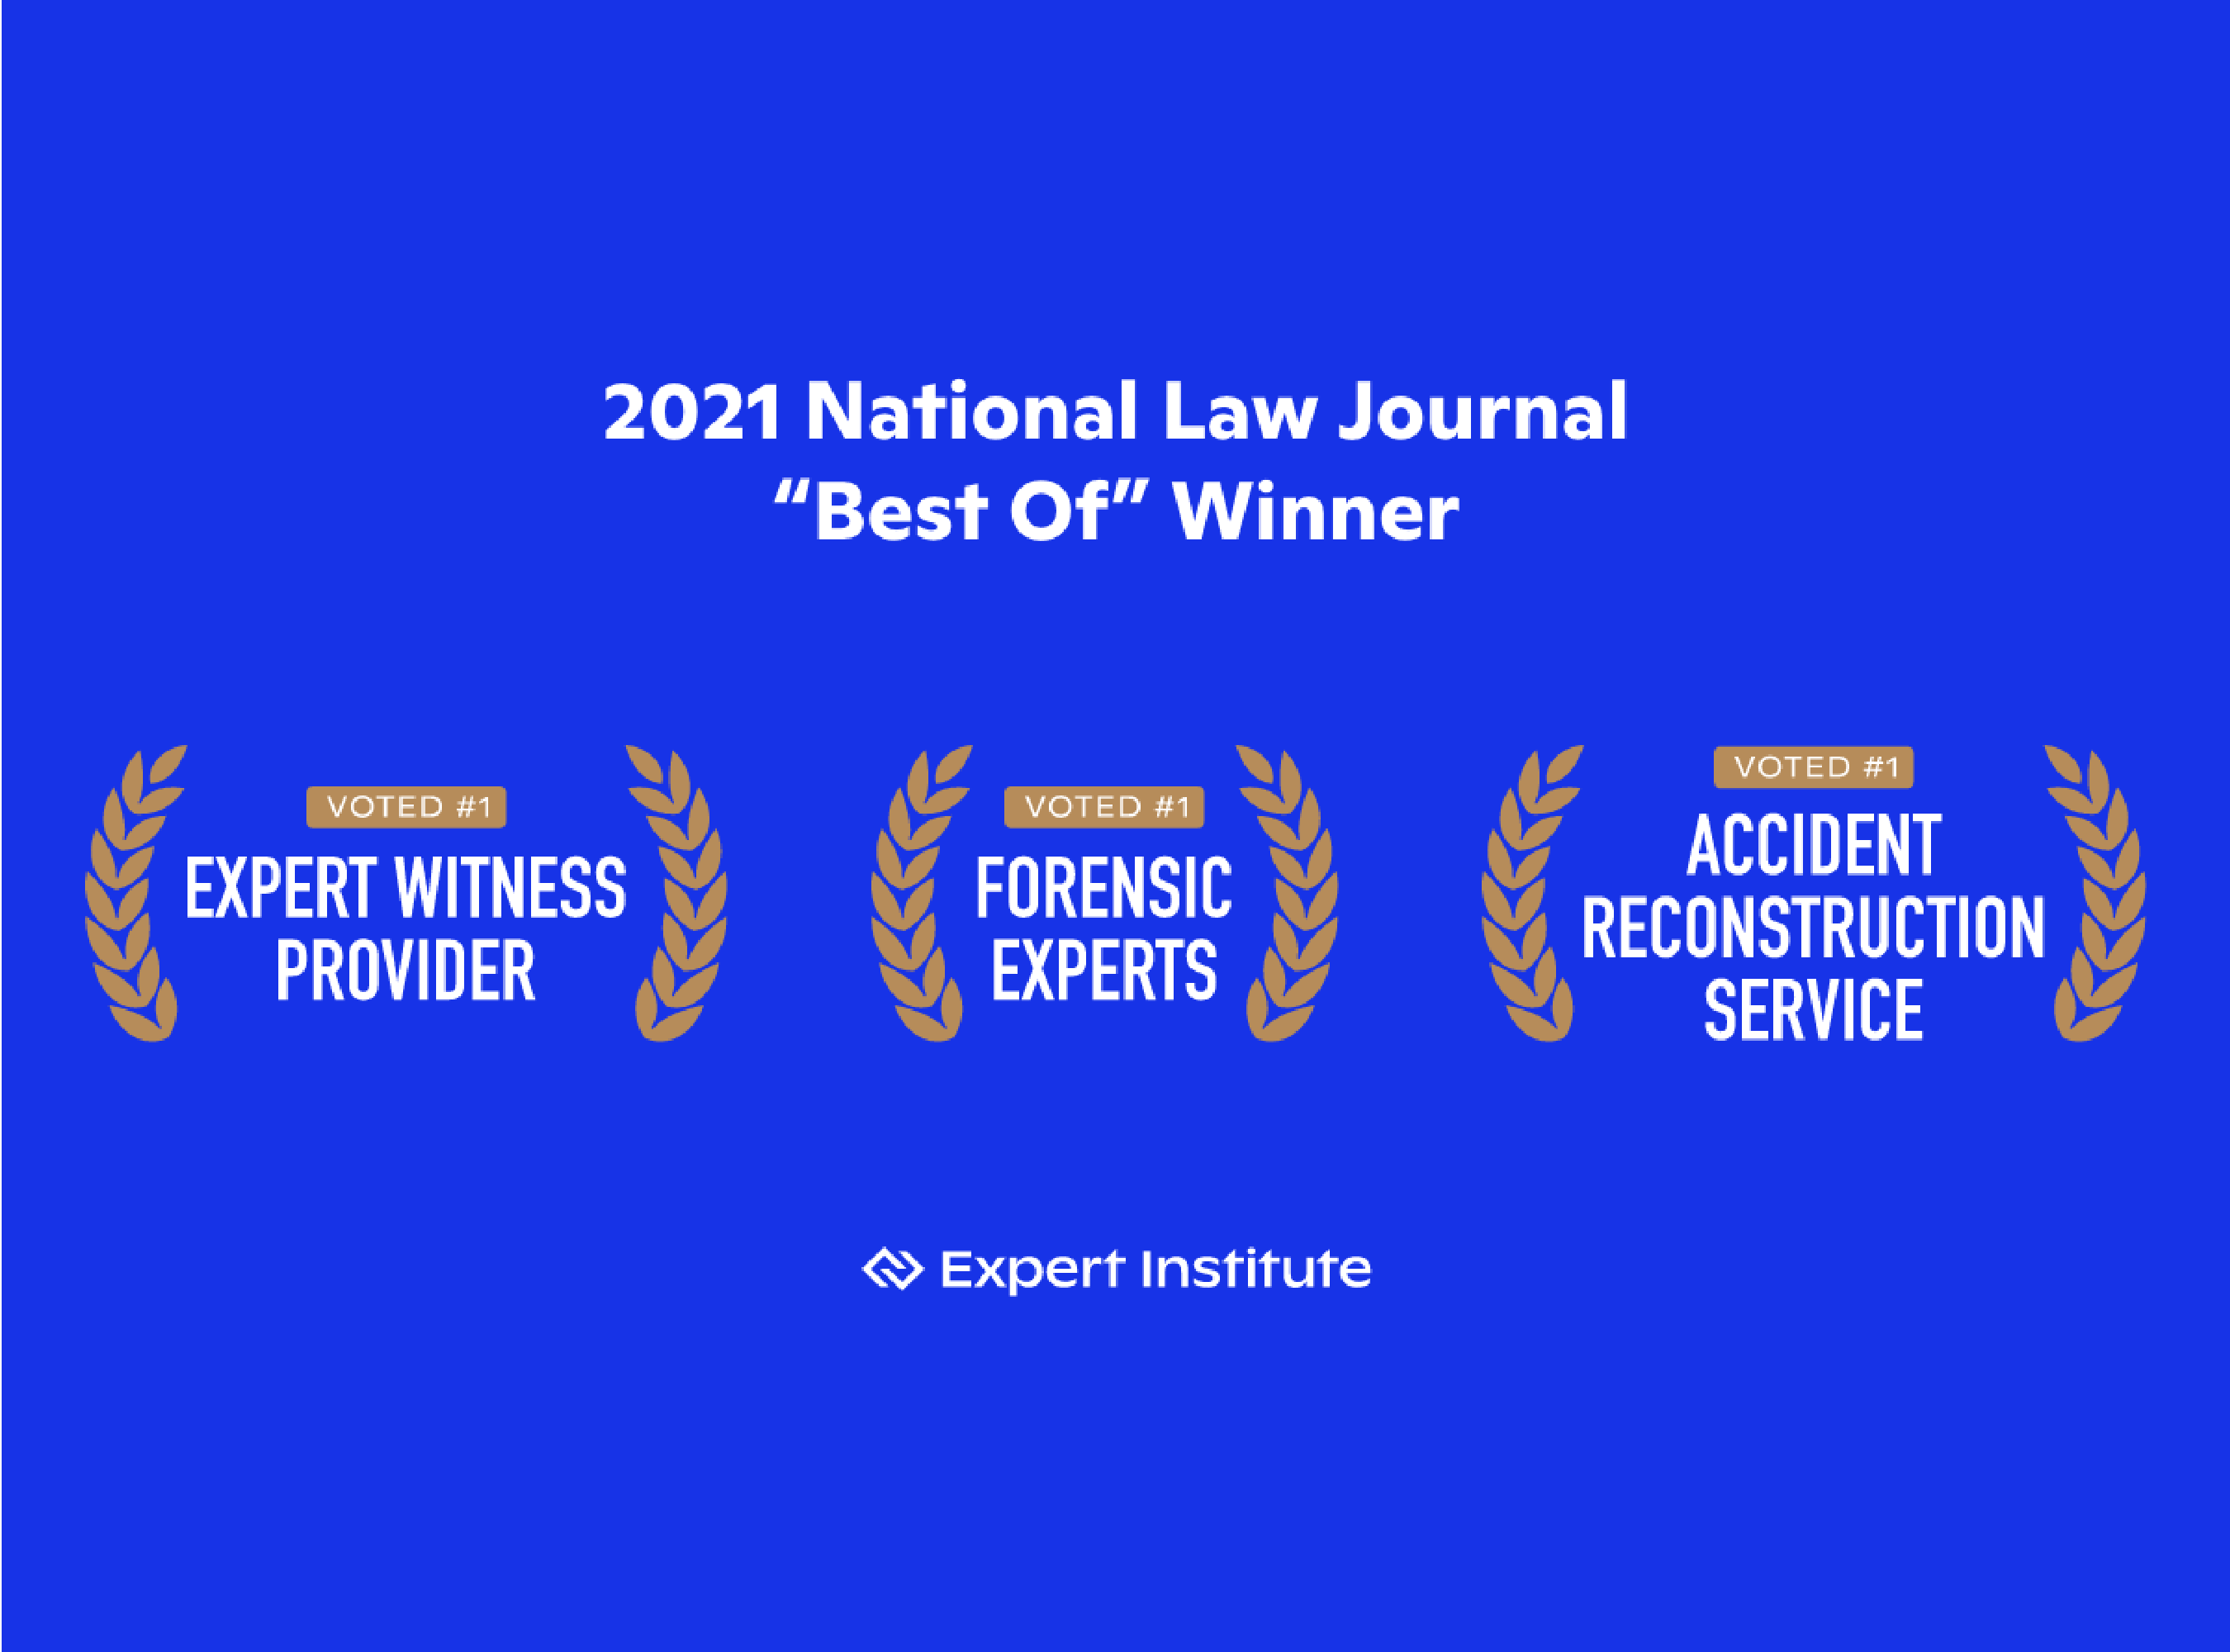 Expert Institute Sweeps #1 in 3 of National Law Journal’s Best Of 2021 Categories